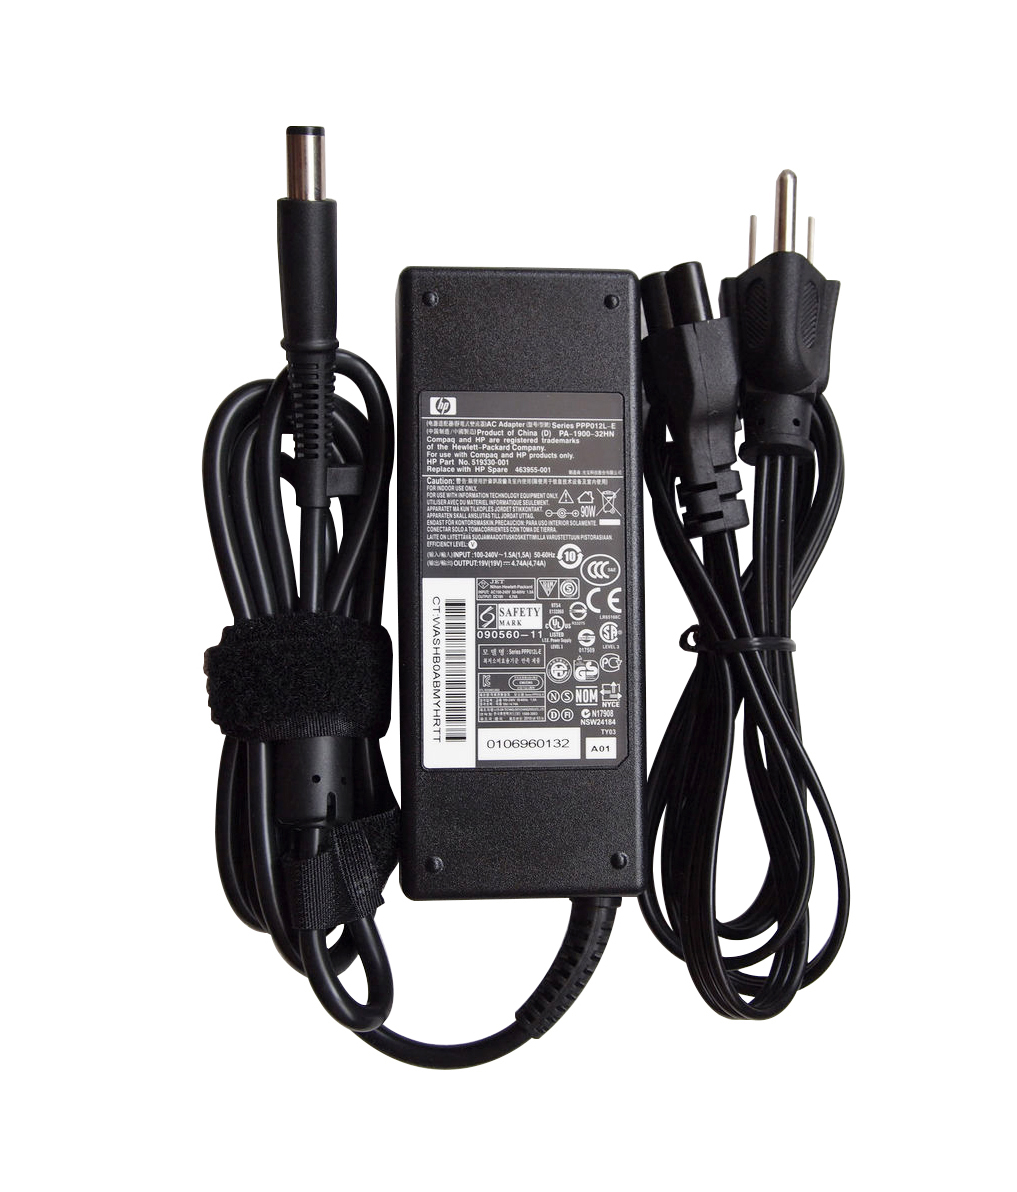 463955-001 HP 90 Watt Ac Smart Pin Slim Power Adapter,power Cable Is Not Included